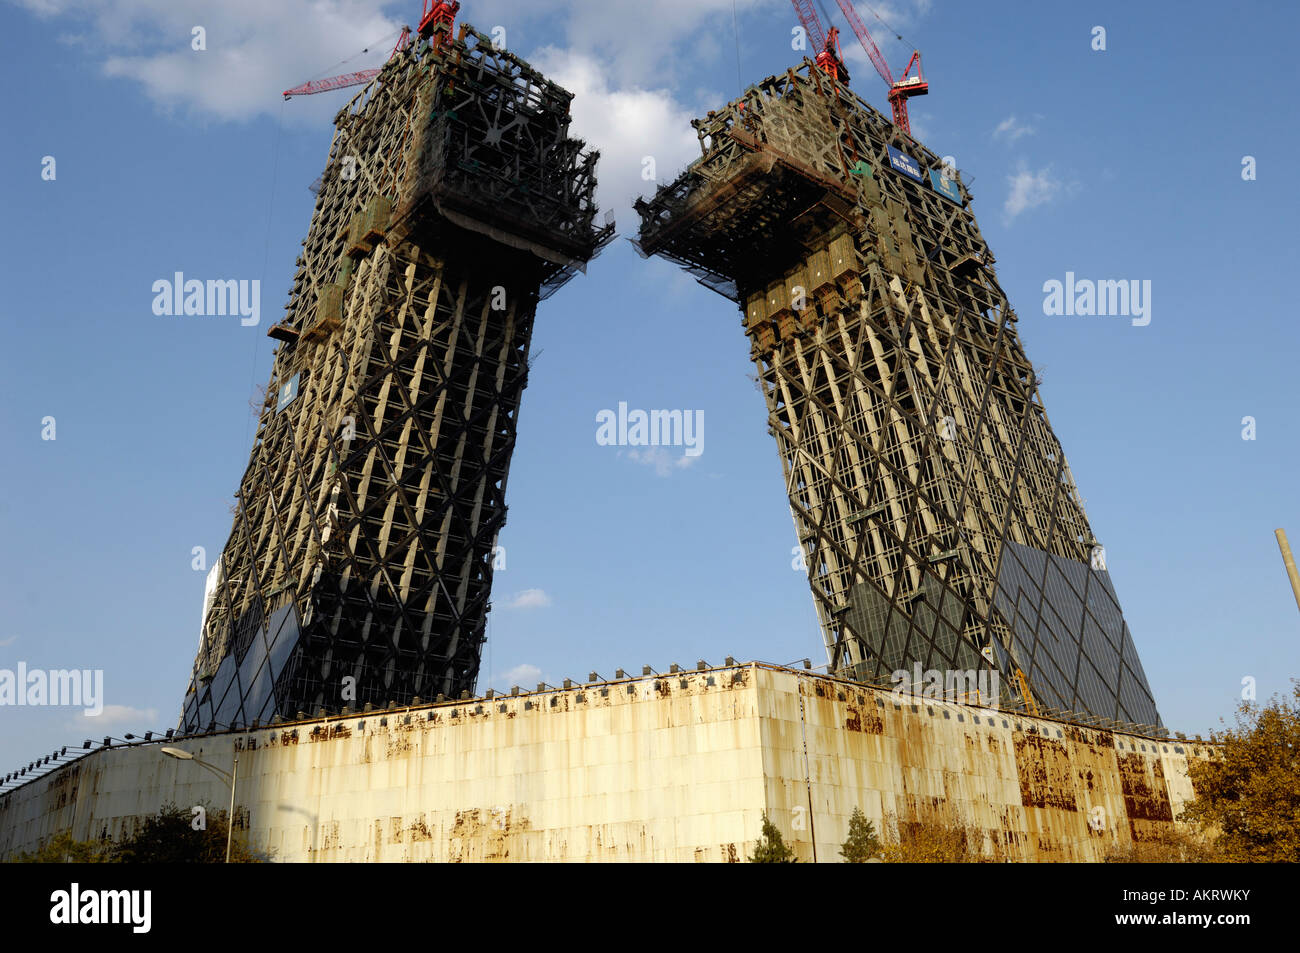 The new headquarters for CCTV is under construction in Beijing 9 Nov 2007 Stock Photo